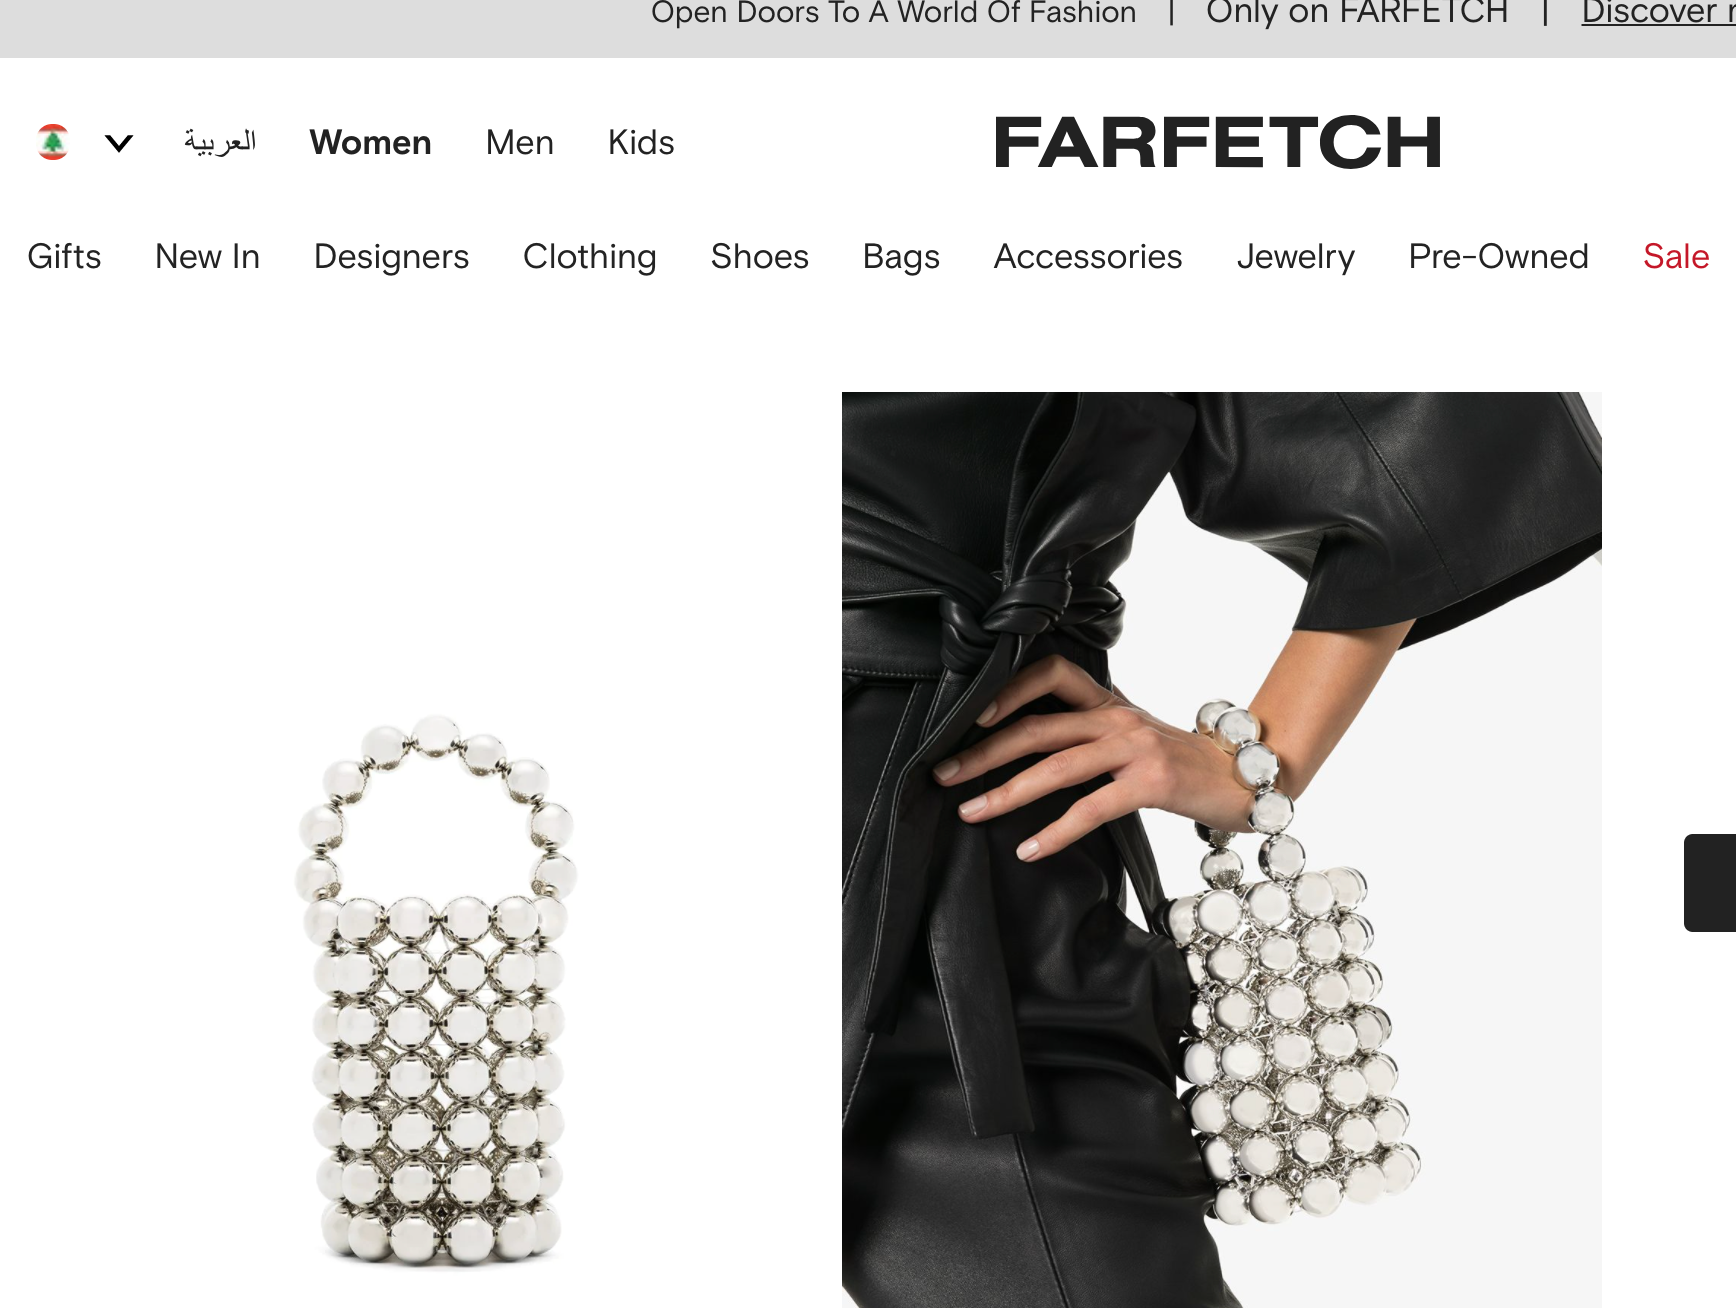 Vanina is now available on Farfetch!